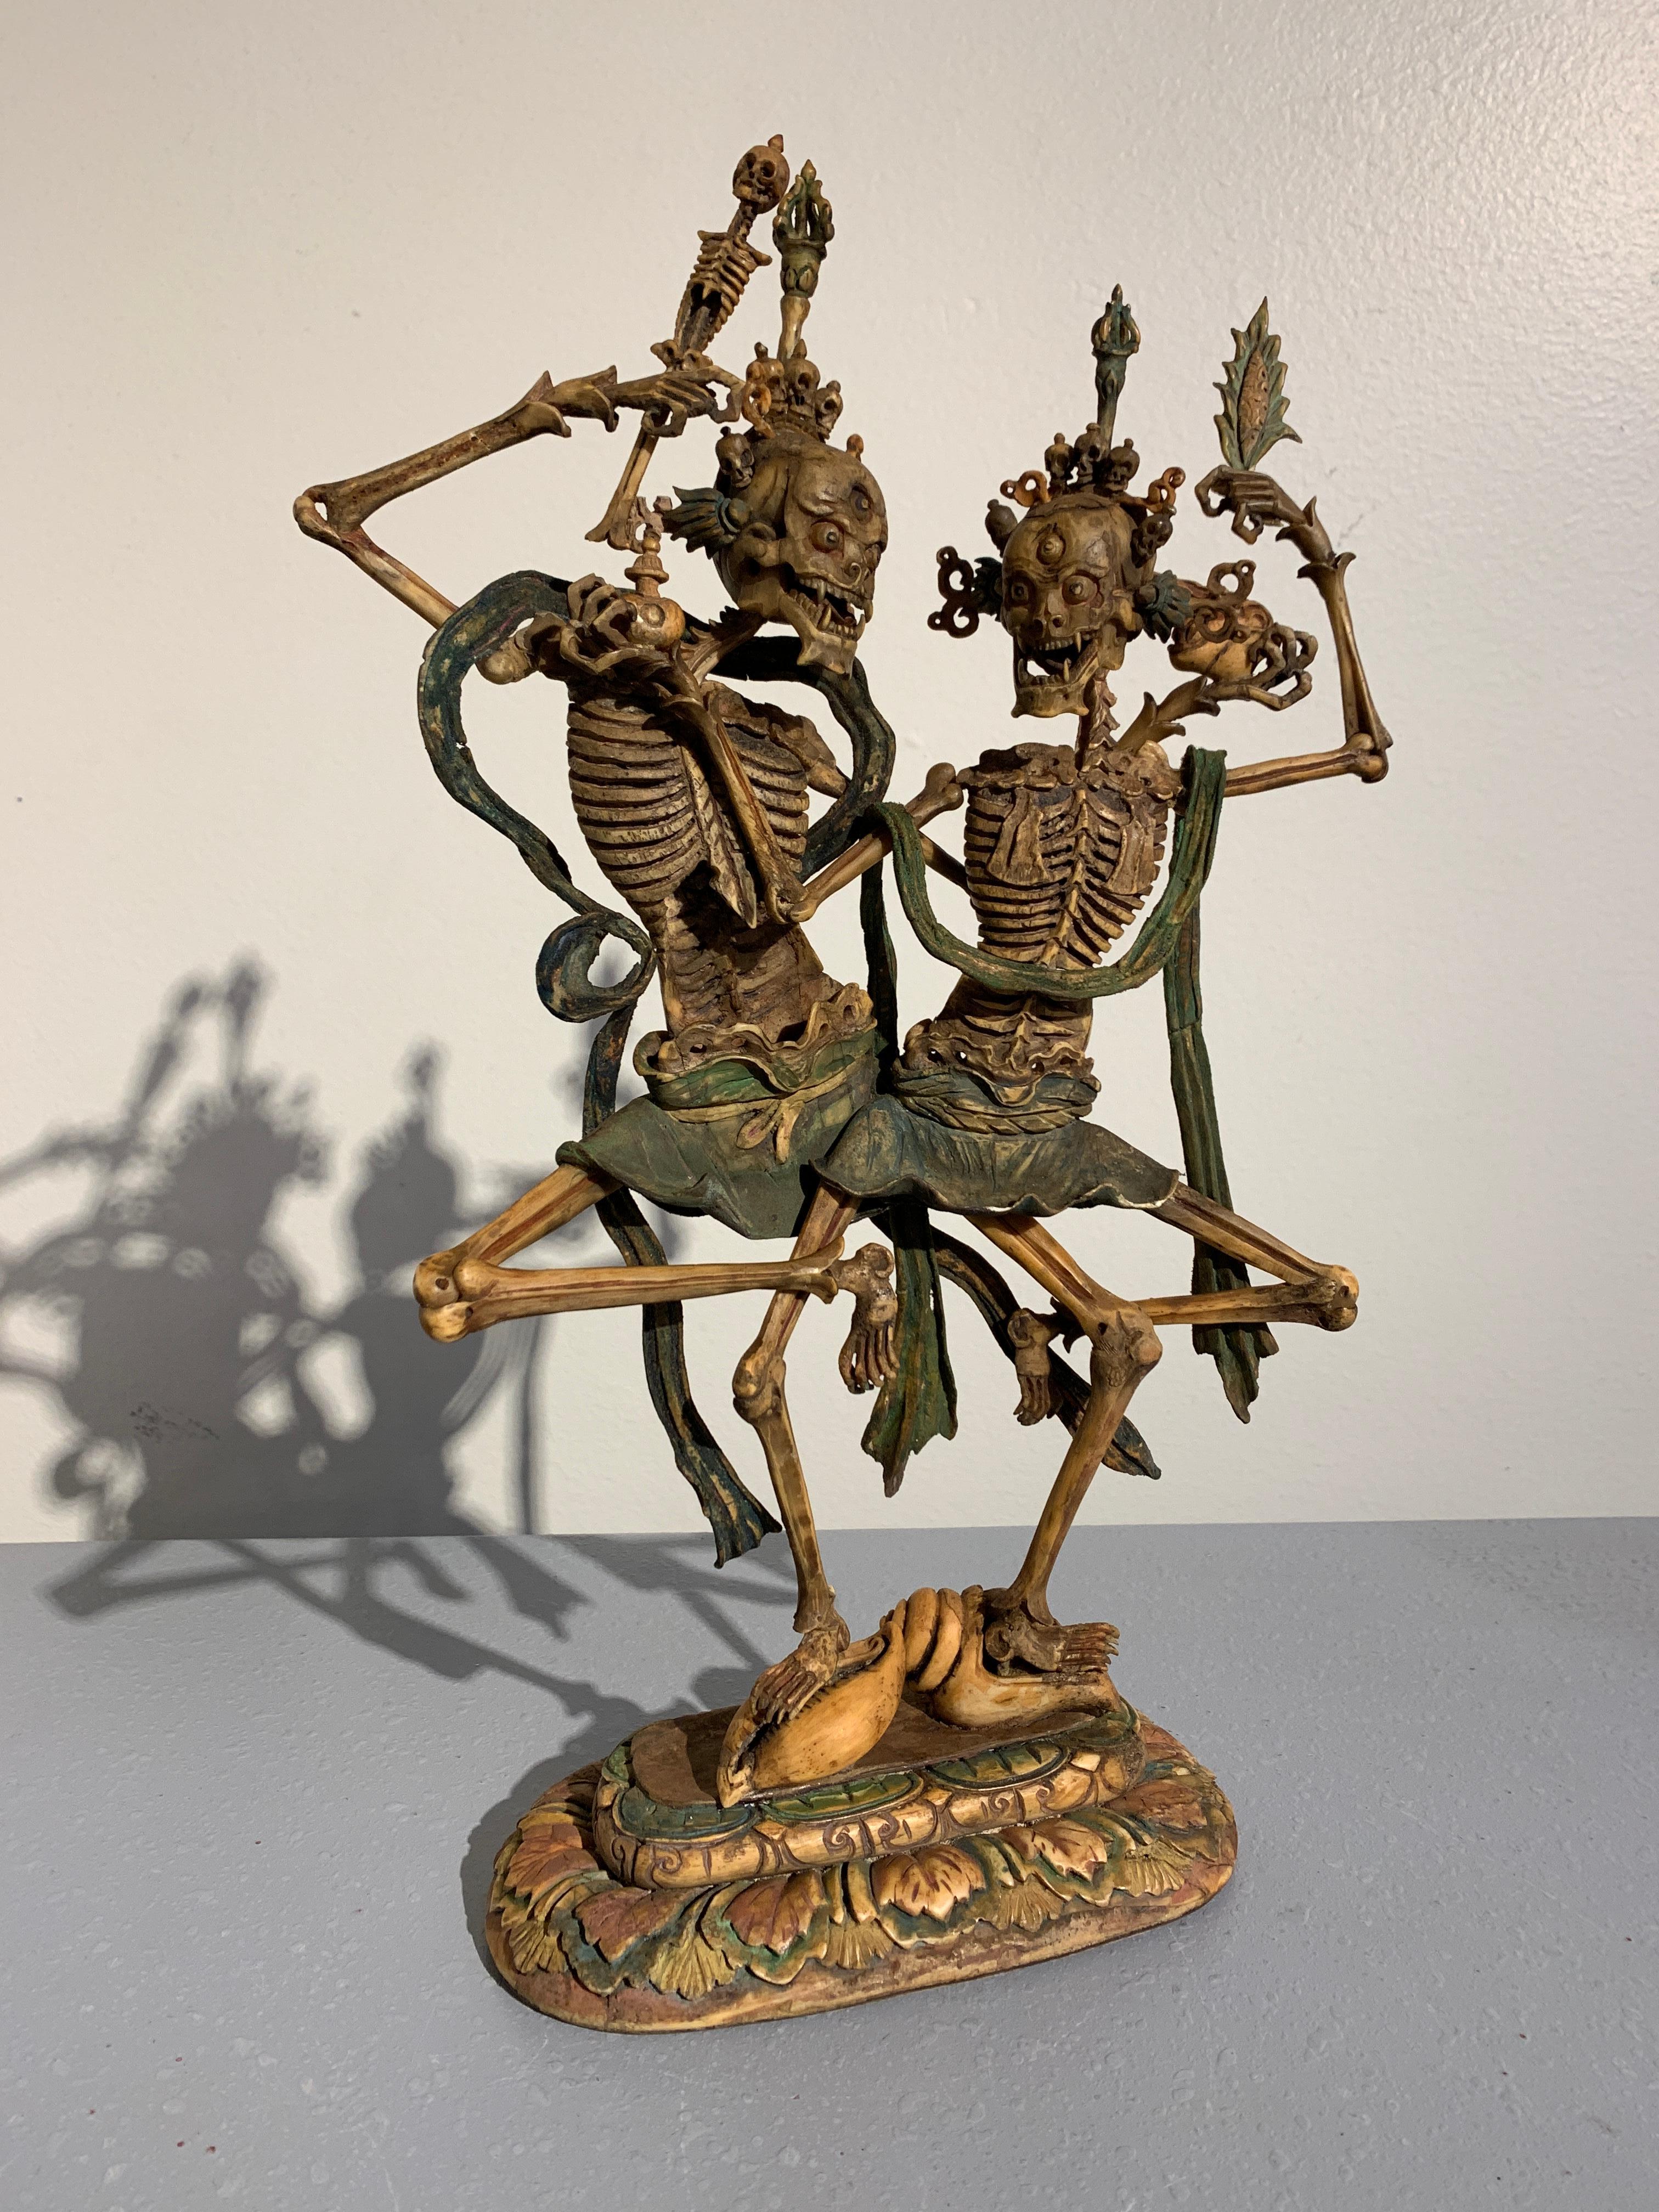 A magnificent polychrome carved bone and wood figure of Chitipati, Shri Shmashana Adhipati, the Glorious Lords of the Charnel Grounds, Mother and Father, Mongolia, 18th century.

Carved from bone, the two skeletal figures are portrayed intertwined